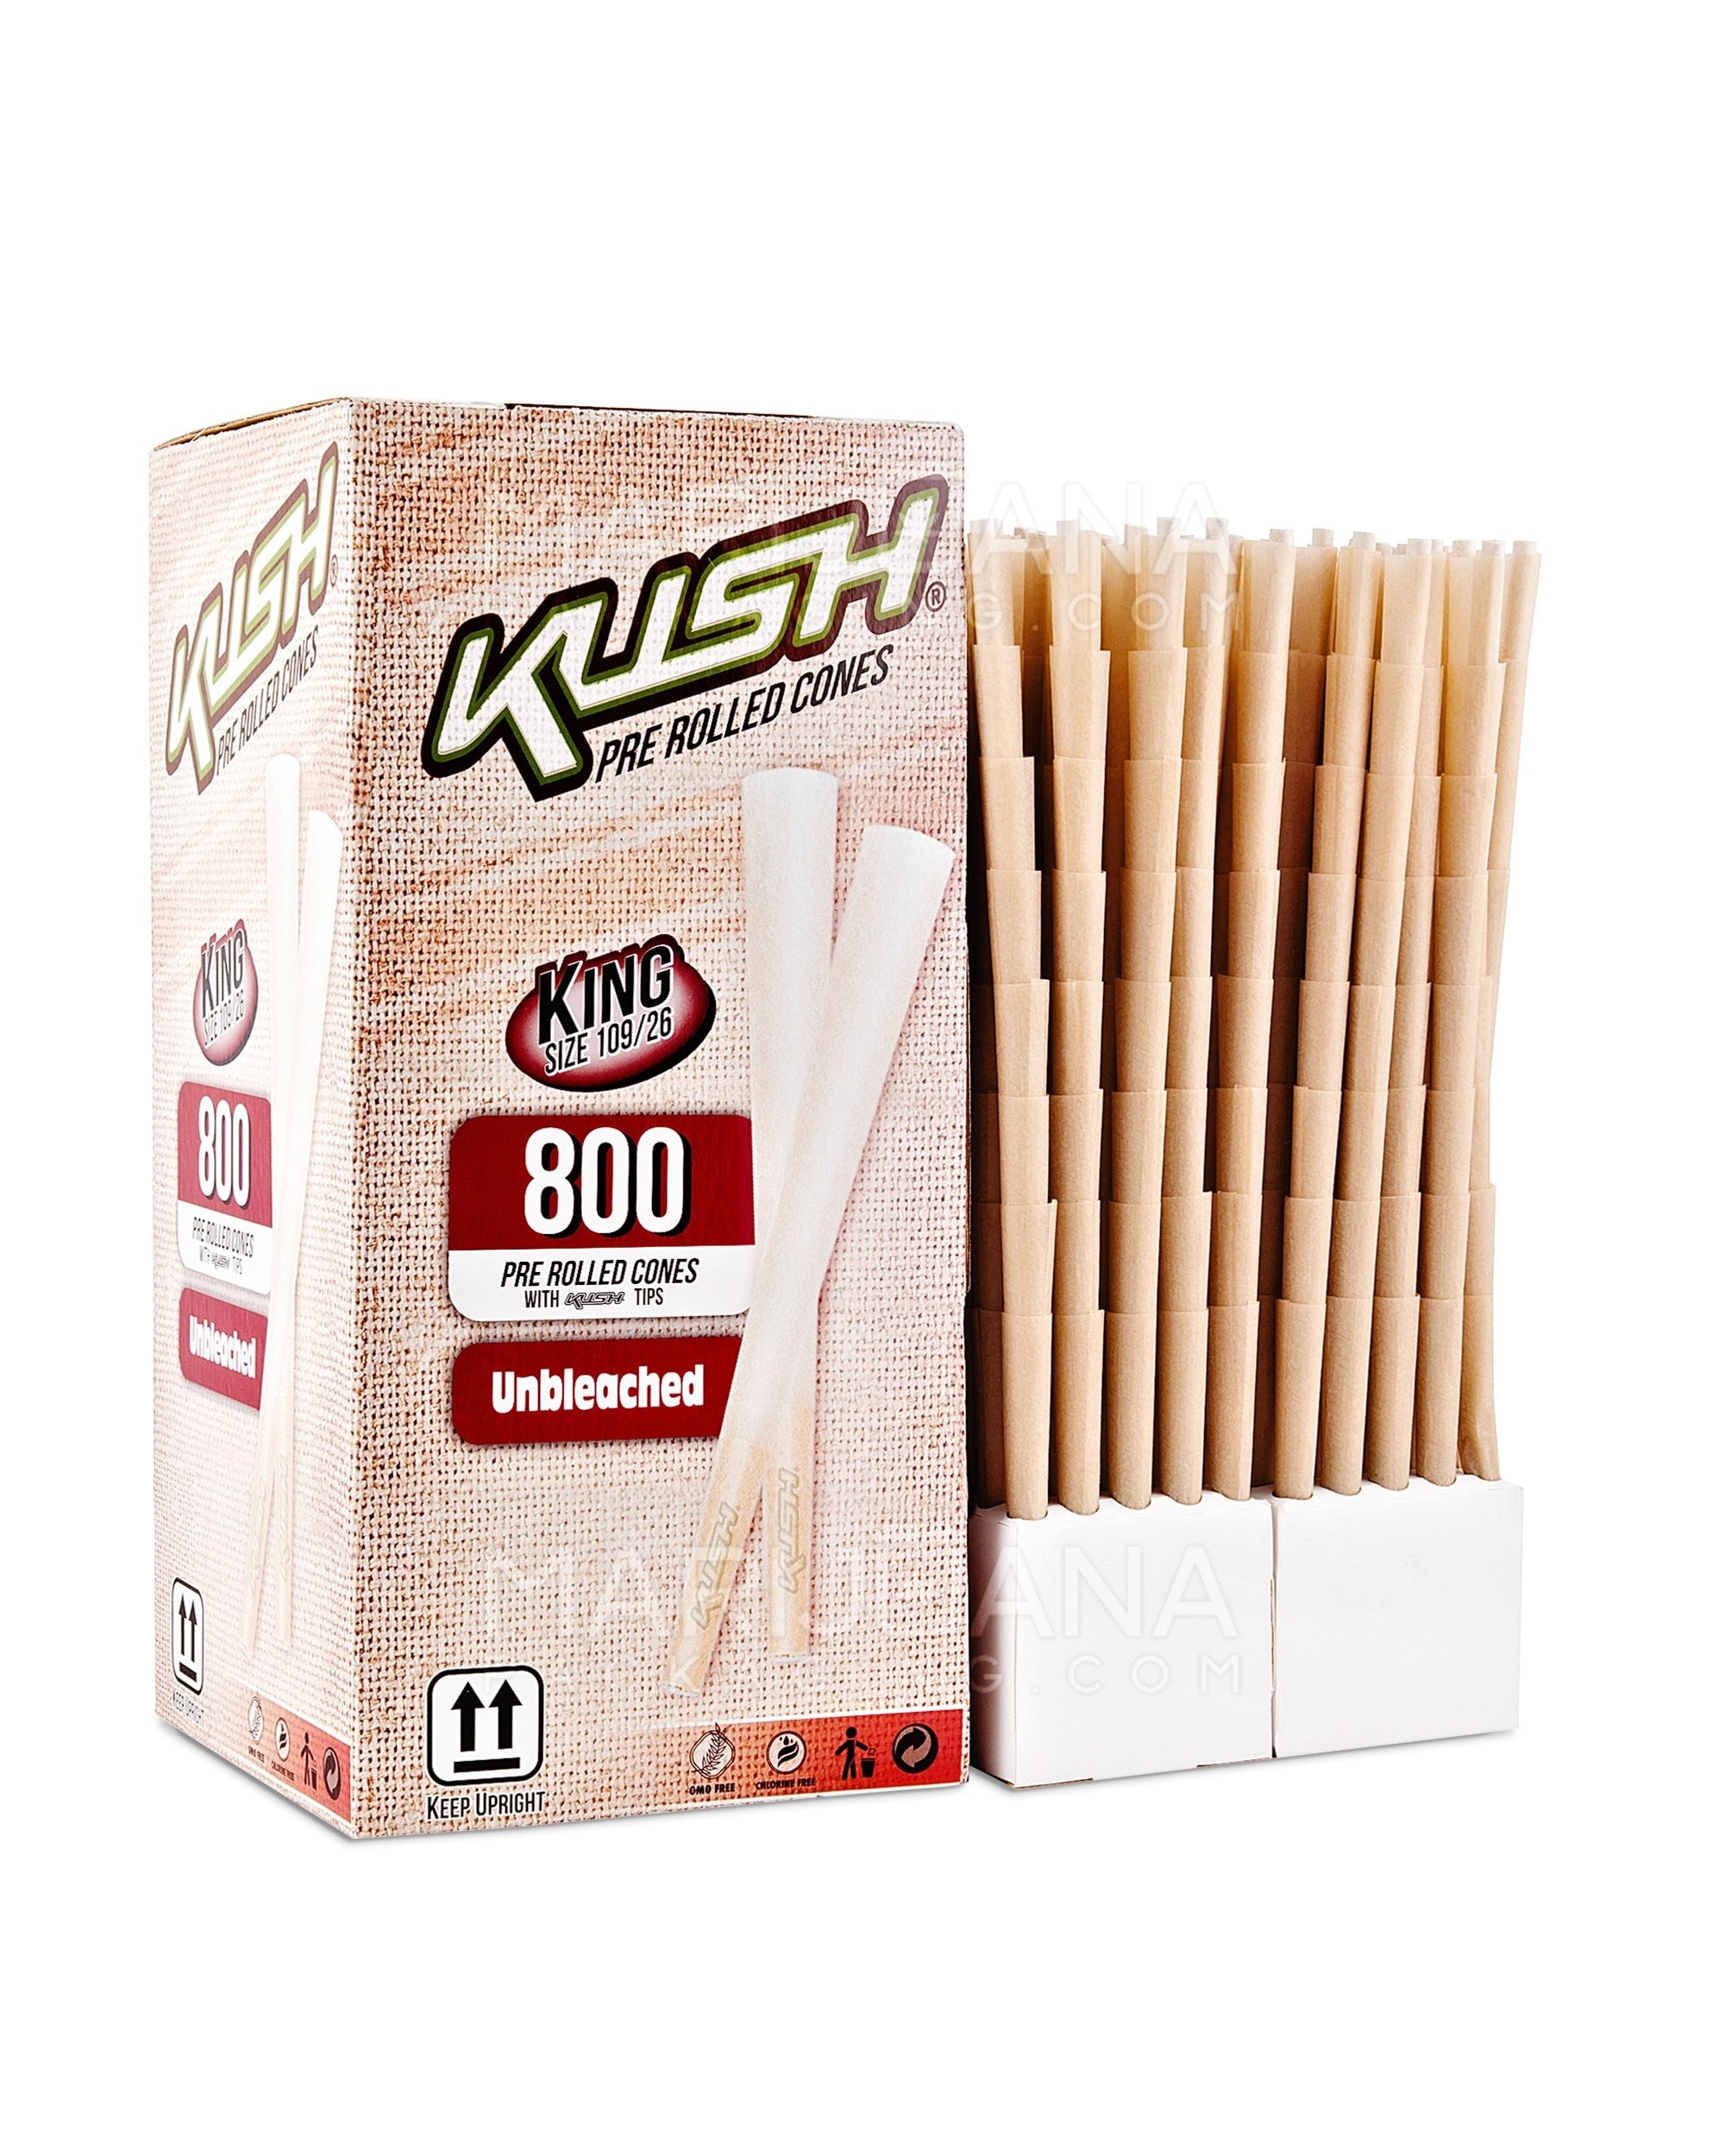 KUSH | Unbleached King Size Pre-Rolled Cones w/ Filter Tip | 109mm - Brown Paper - 800 Count - 2